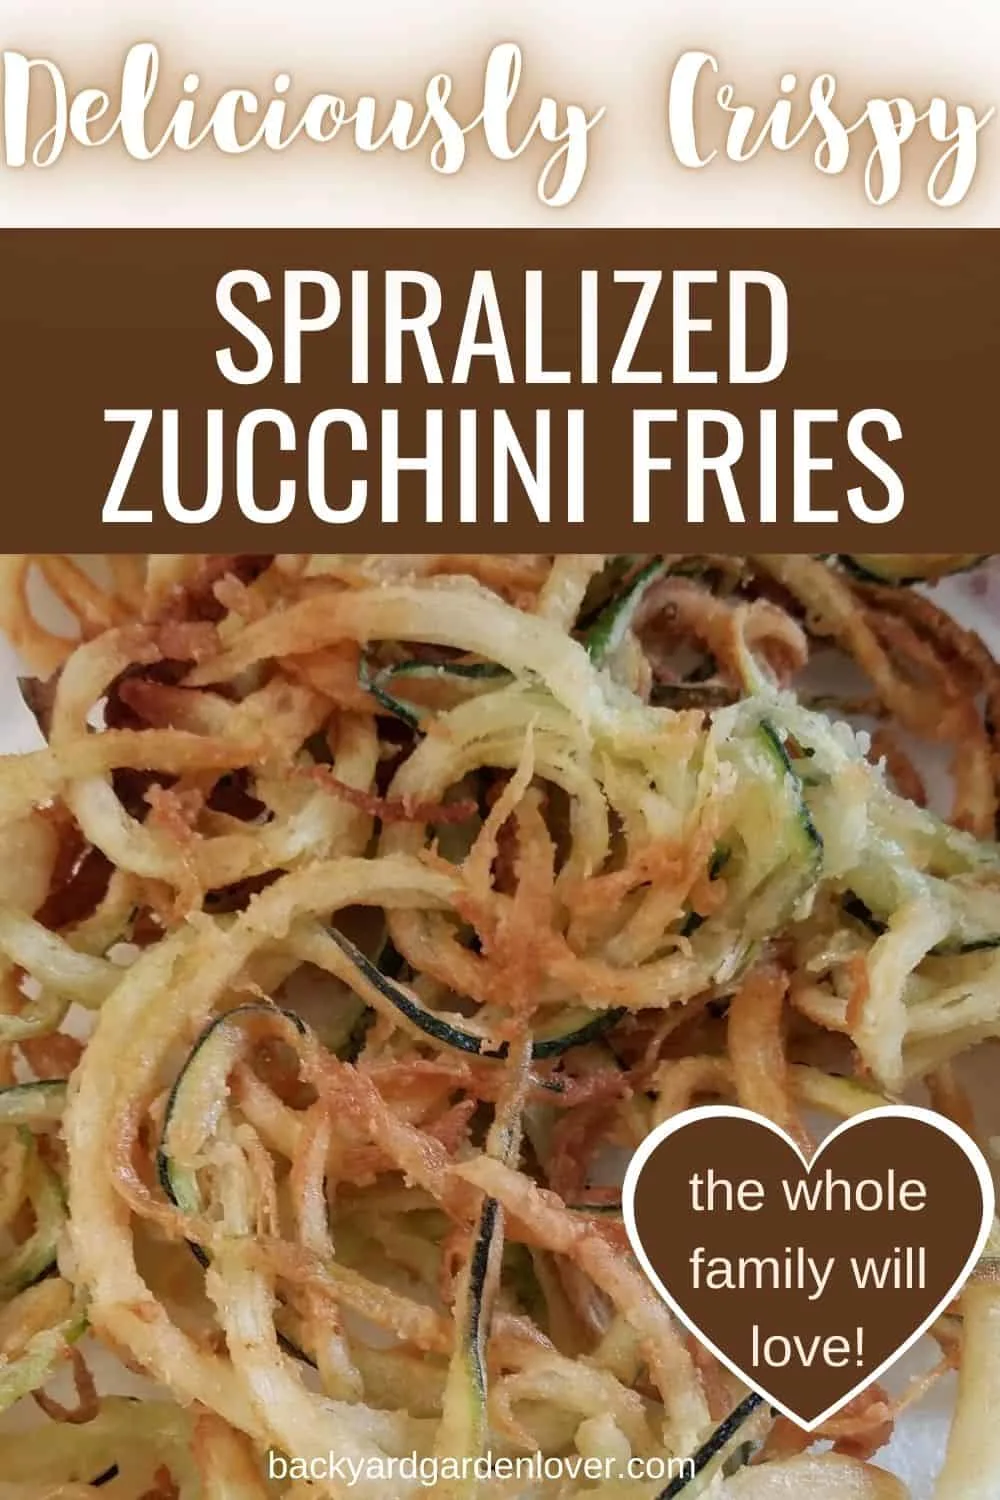 Crispy curly zucchini fries the whole family will love - Pinterest image